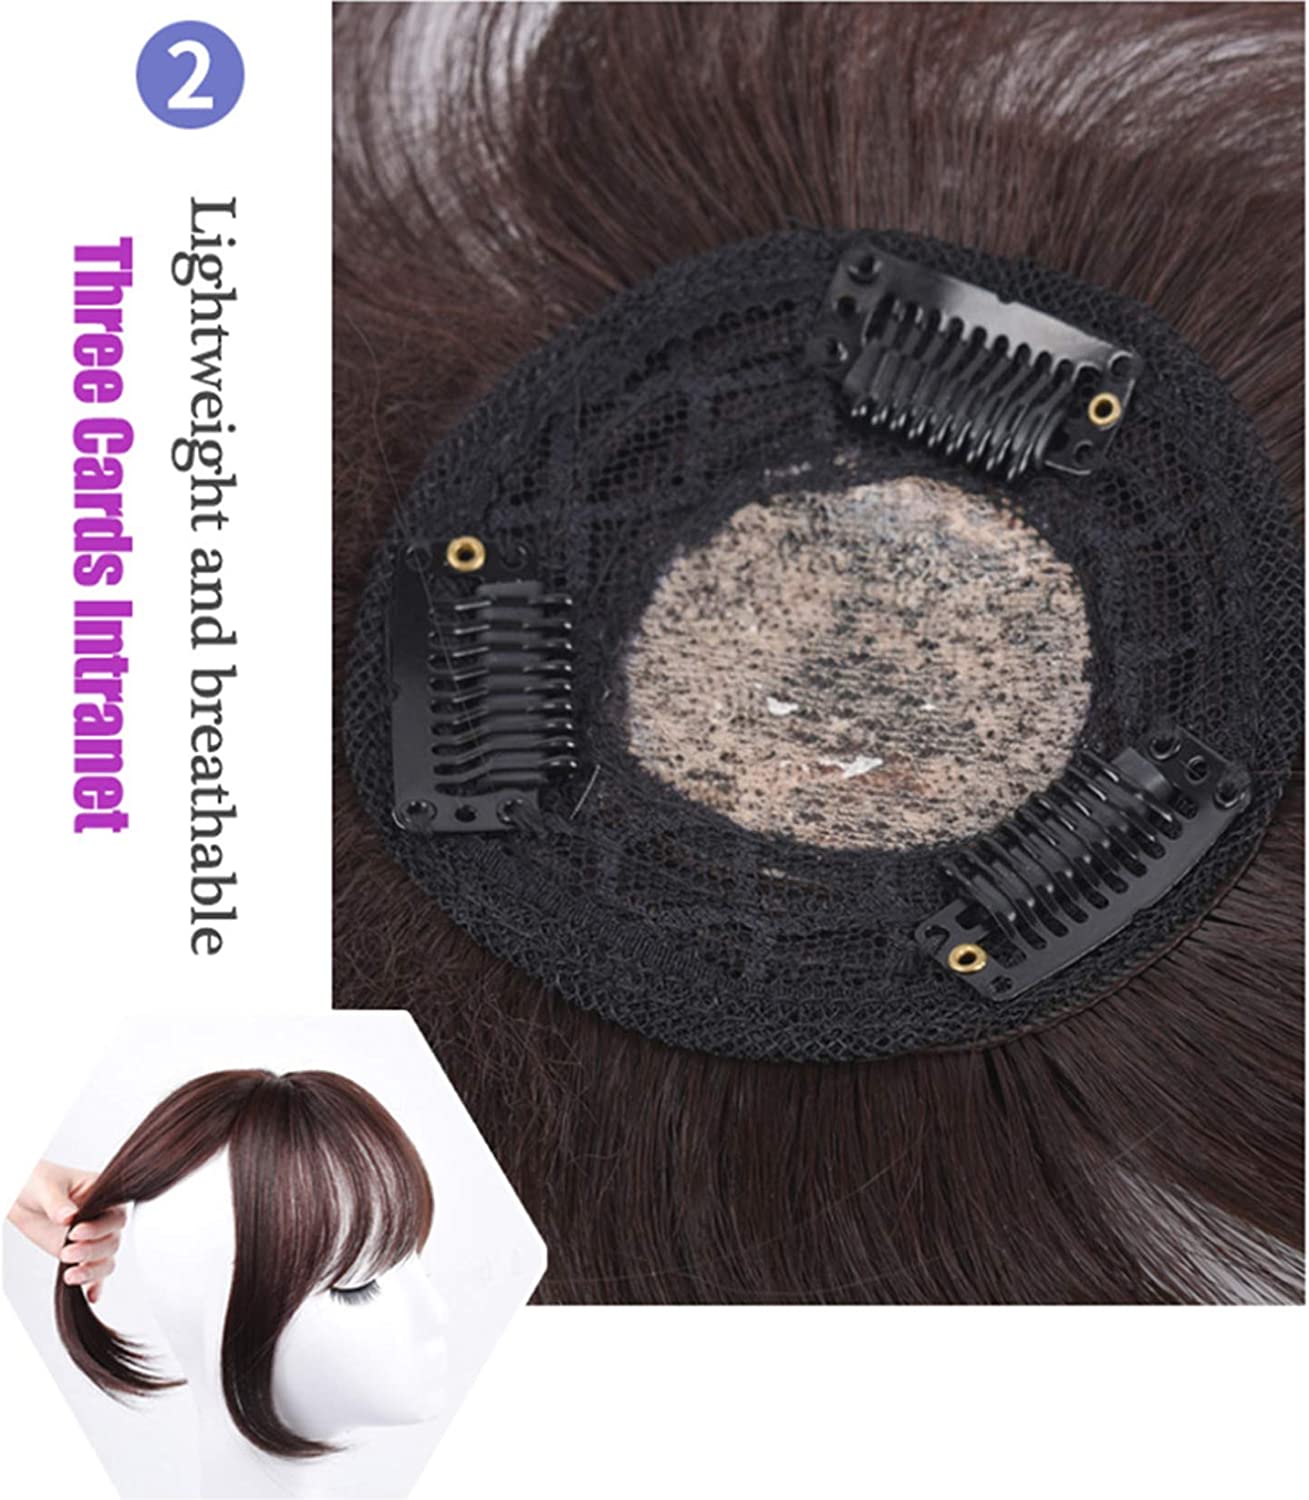 100% Human Hair Toppers Clip In Crown Toppers With 3D Air Bangs Hair For Women Straight Hair Bangs Toupee Mid Part Wiglets Hairpieces for Mild Hair Loss Volume Cover Gray Hair (Light Brown, 25 cm)